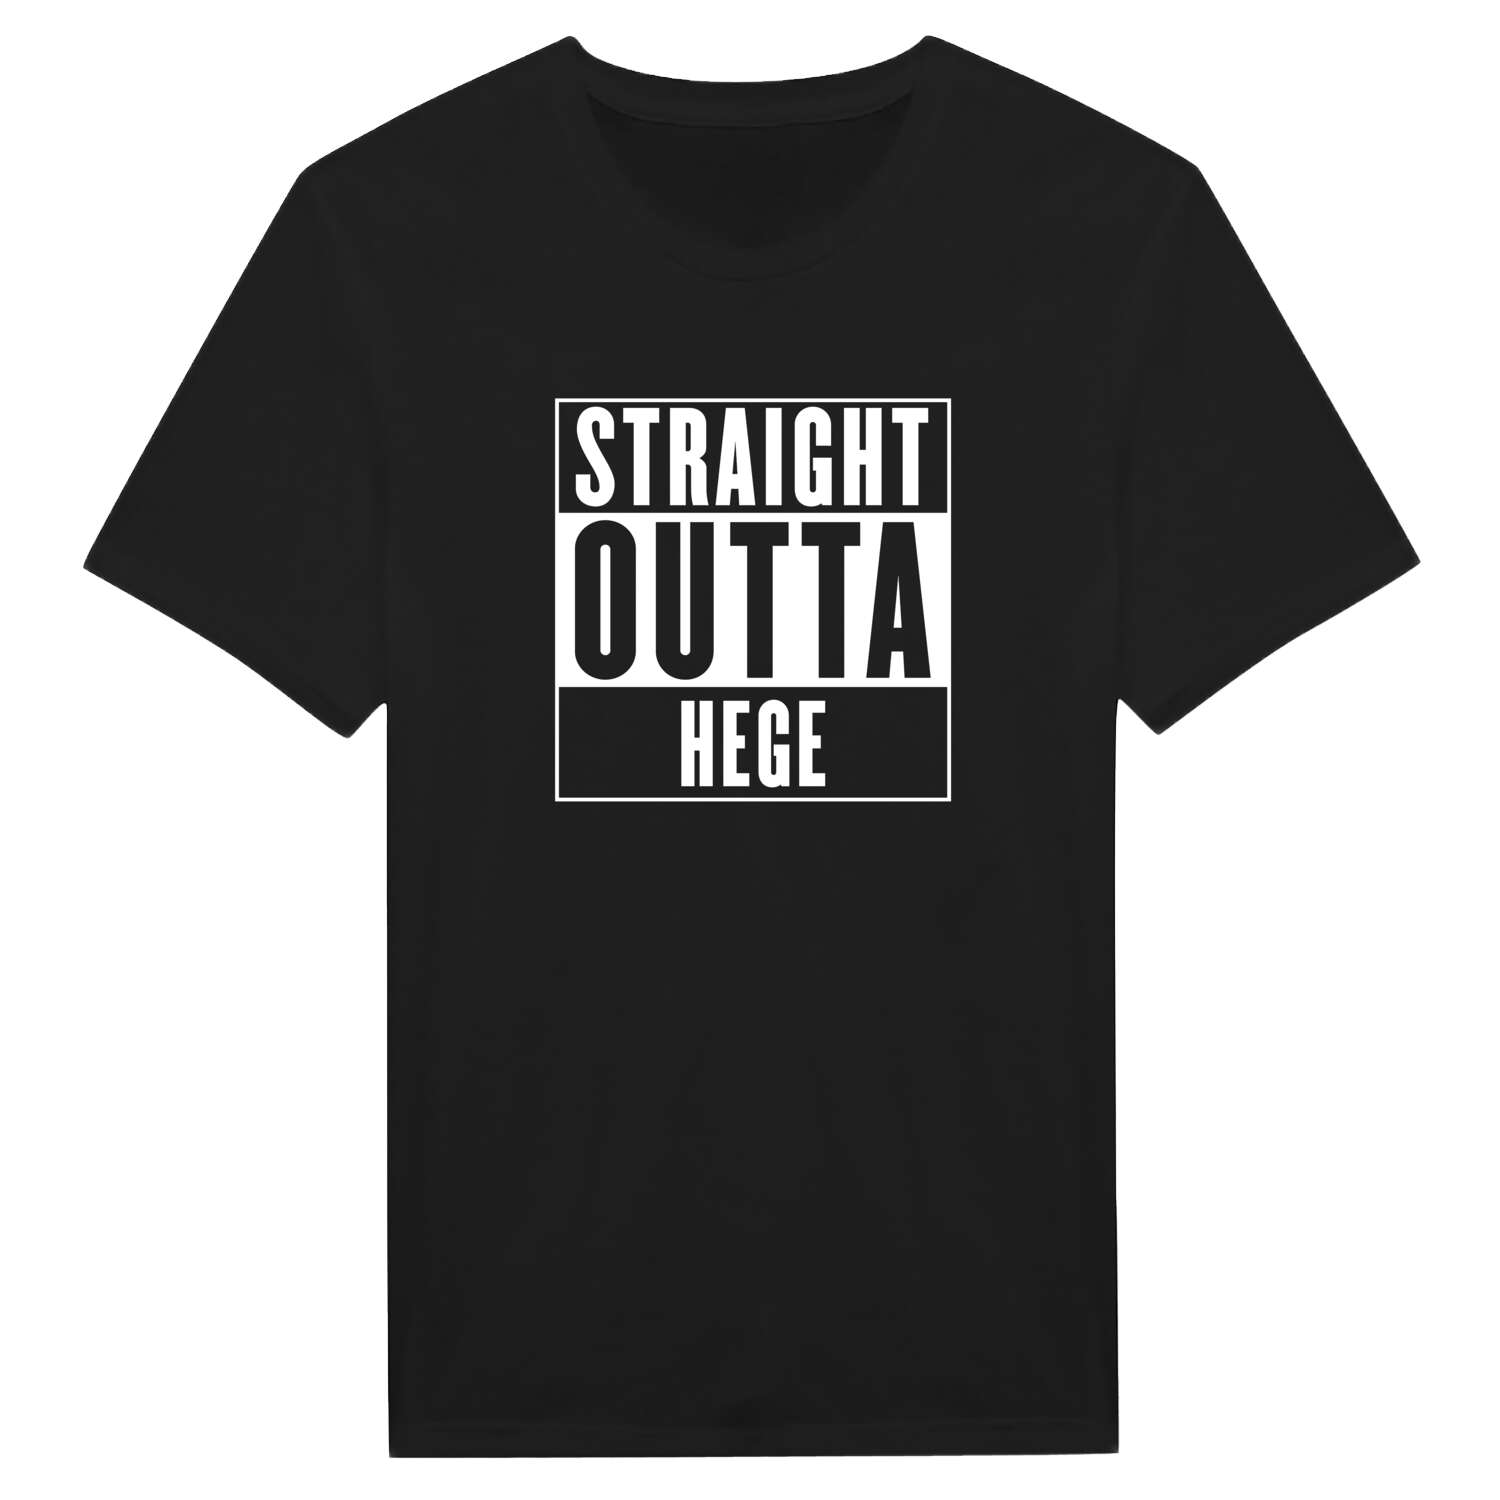 Hege T-Shirt »Straight Outta«